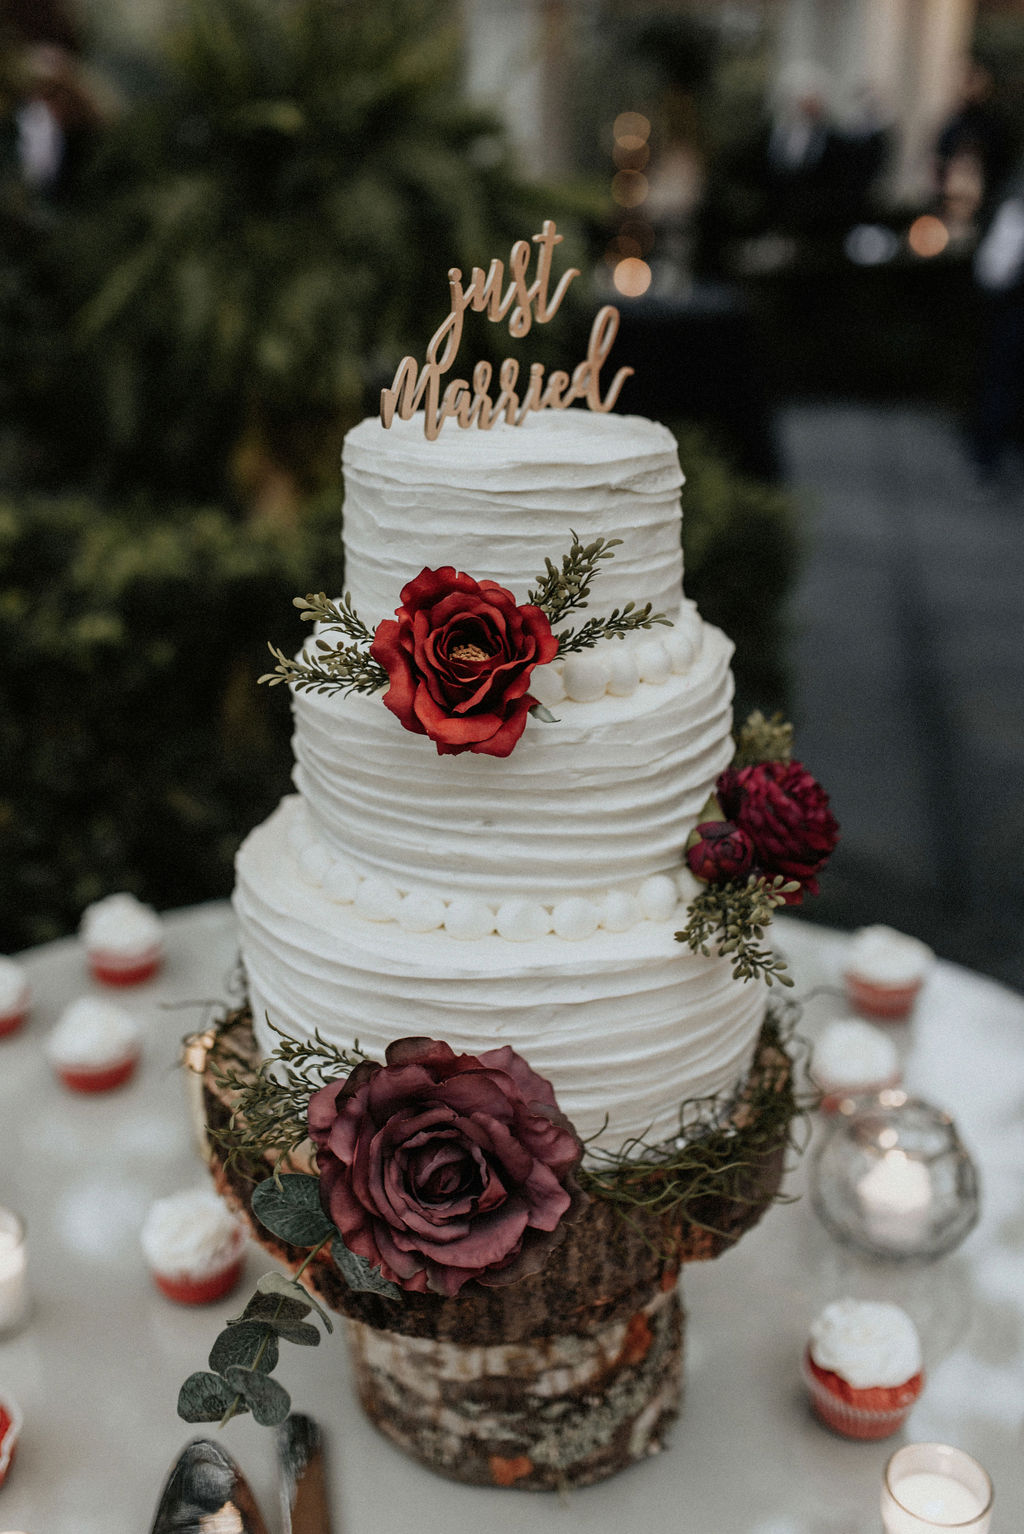 Winter wedding cake: Magical Winter Wedding by Meghan Melia Photography featured on Nashville Bride Guide!